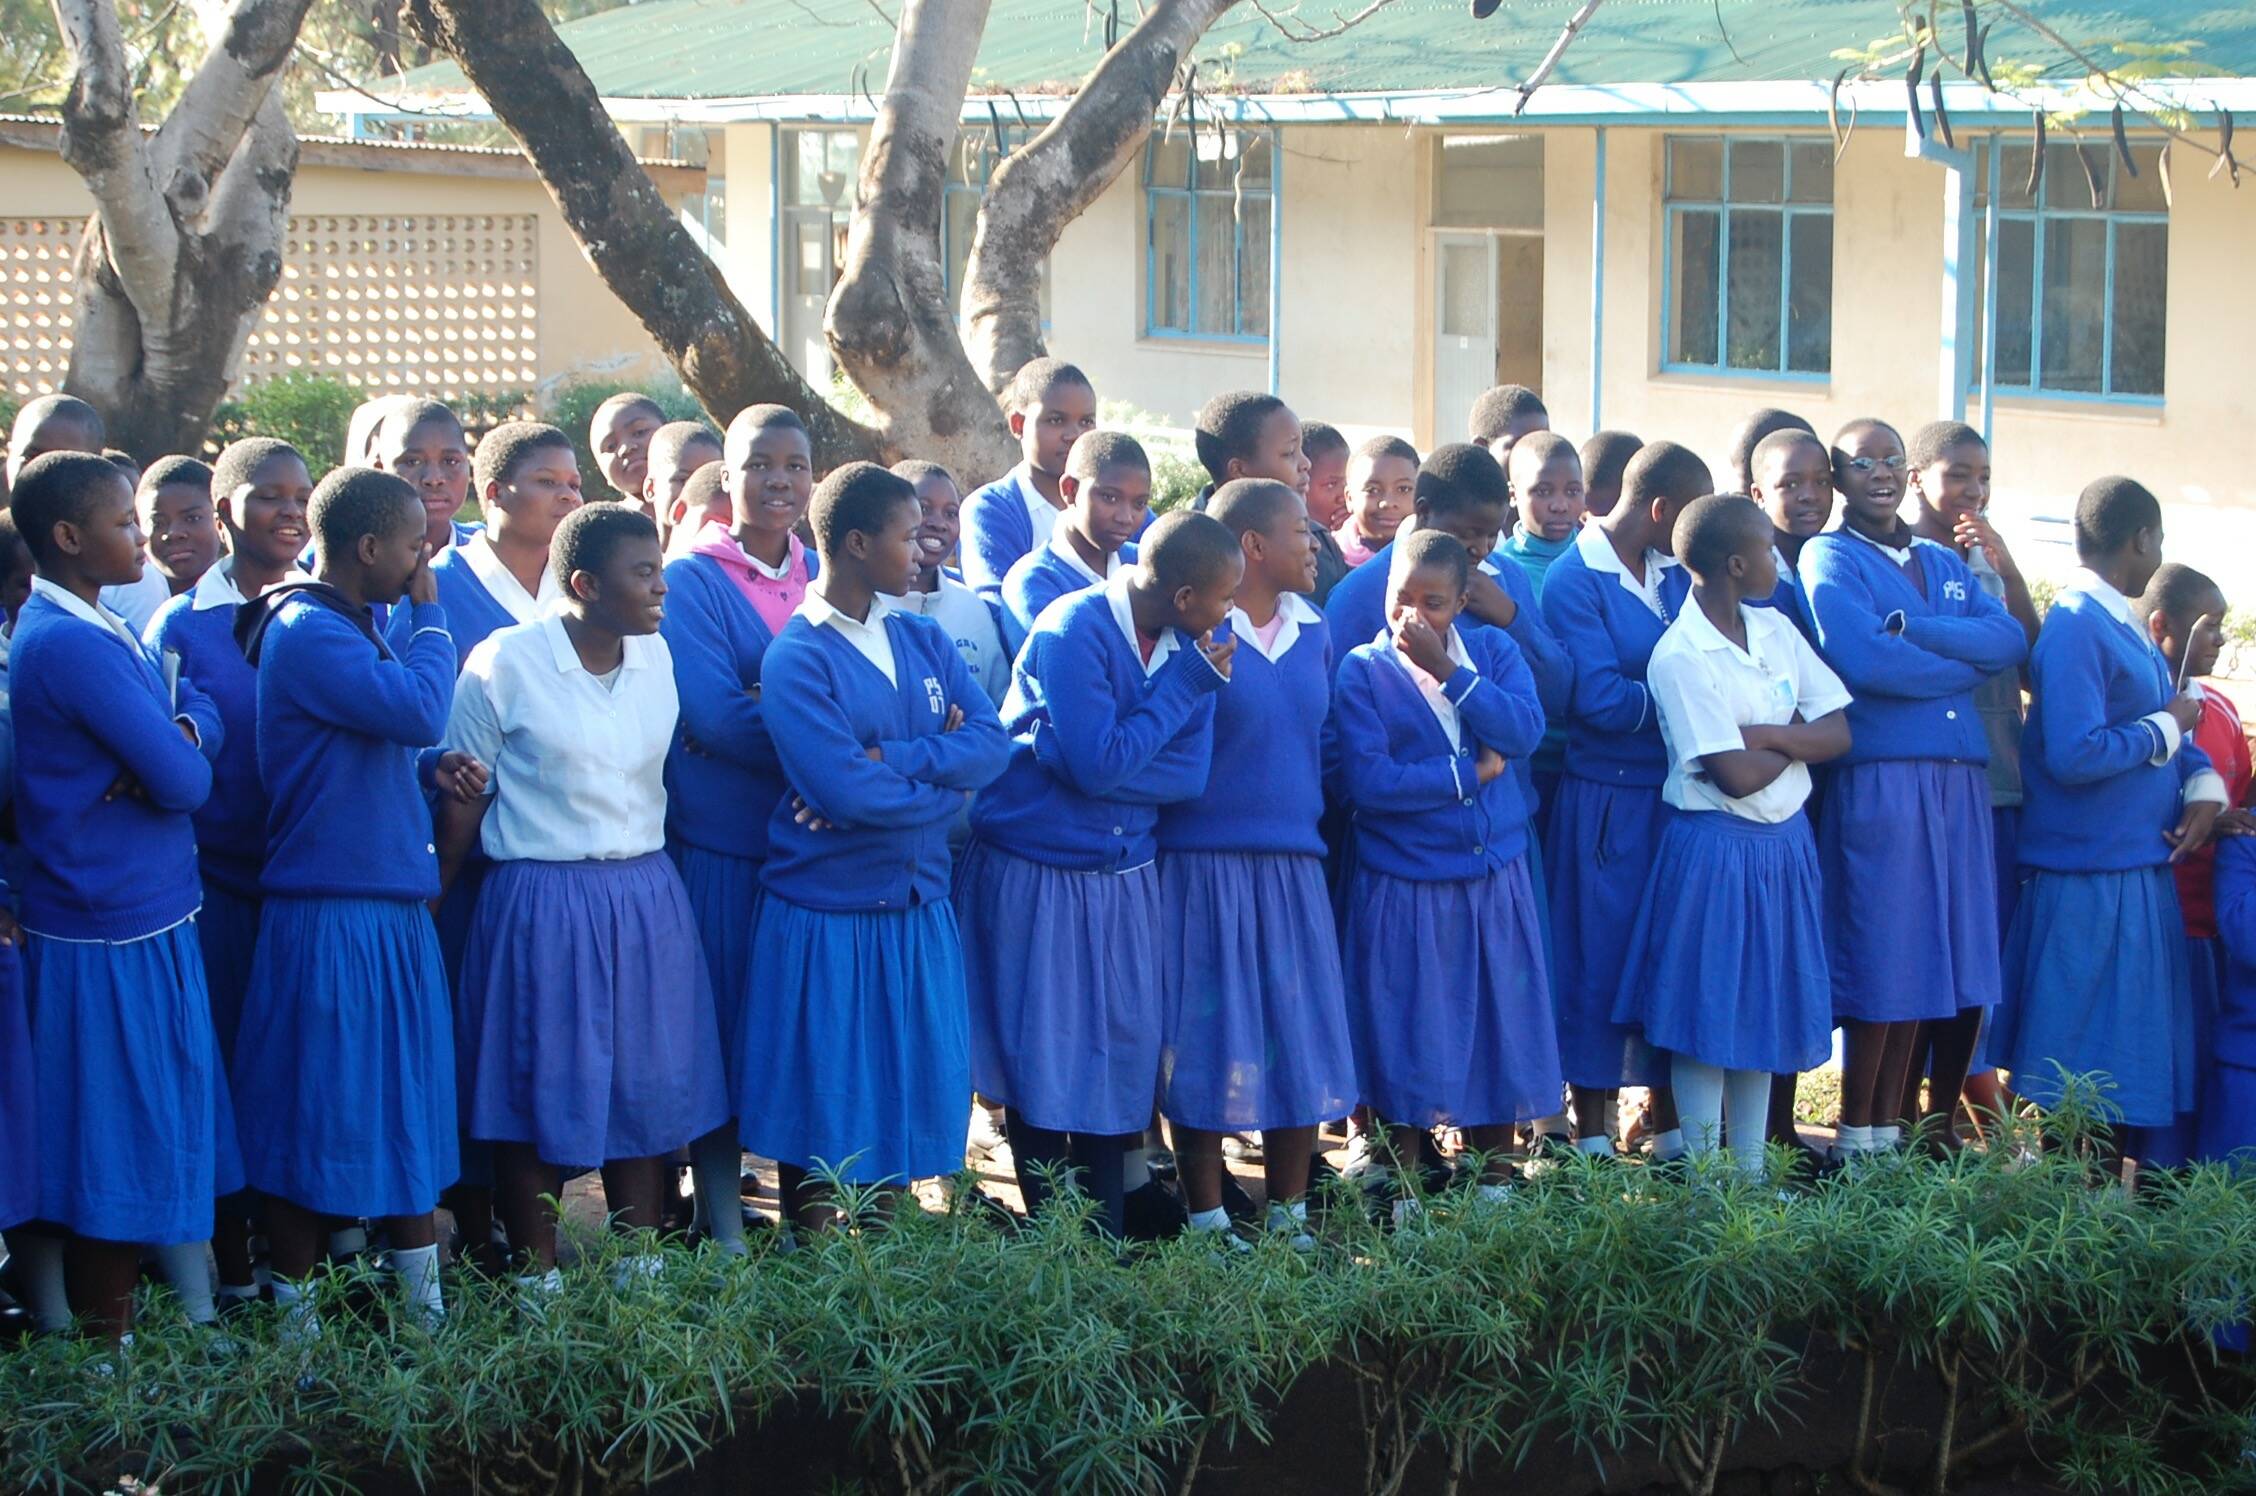 Dubai Cares Launches Engaging Communities and Schools in support of Adolescent Girls’ Education program in Malawi